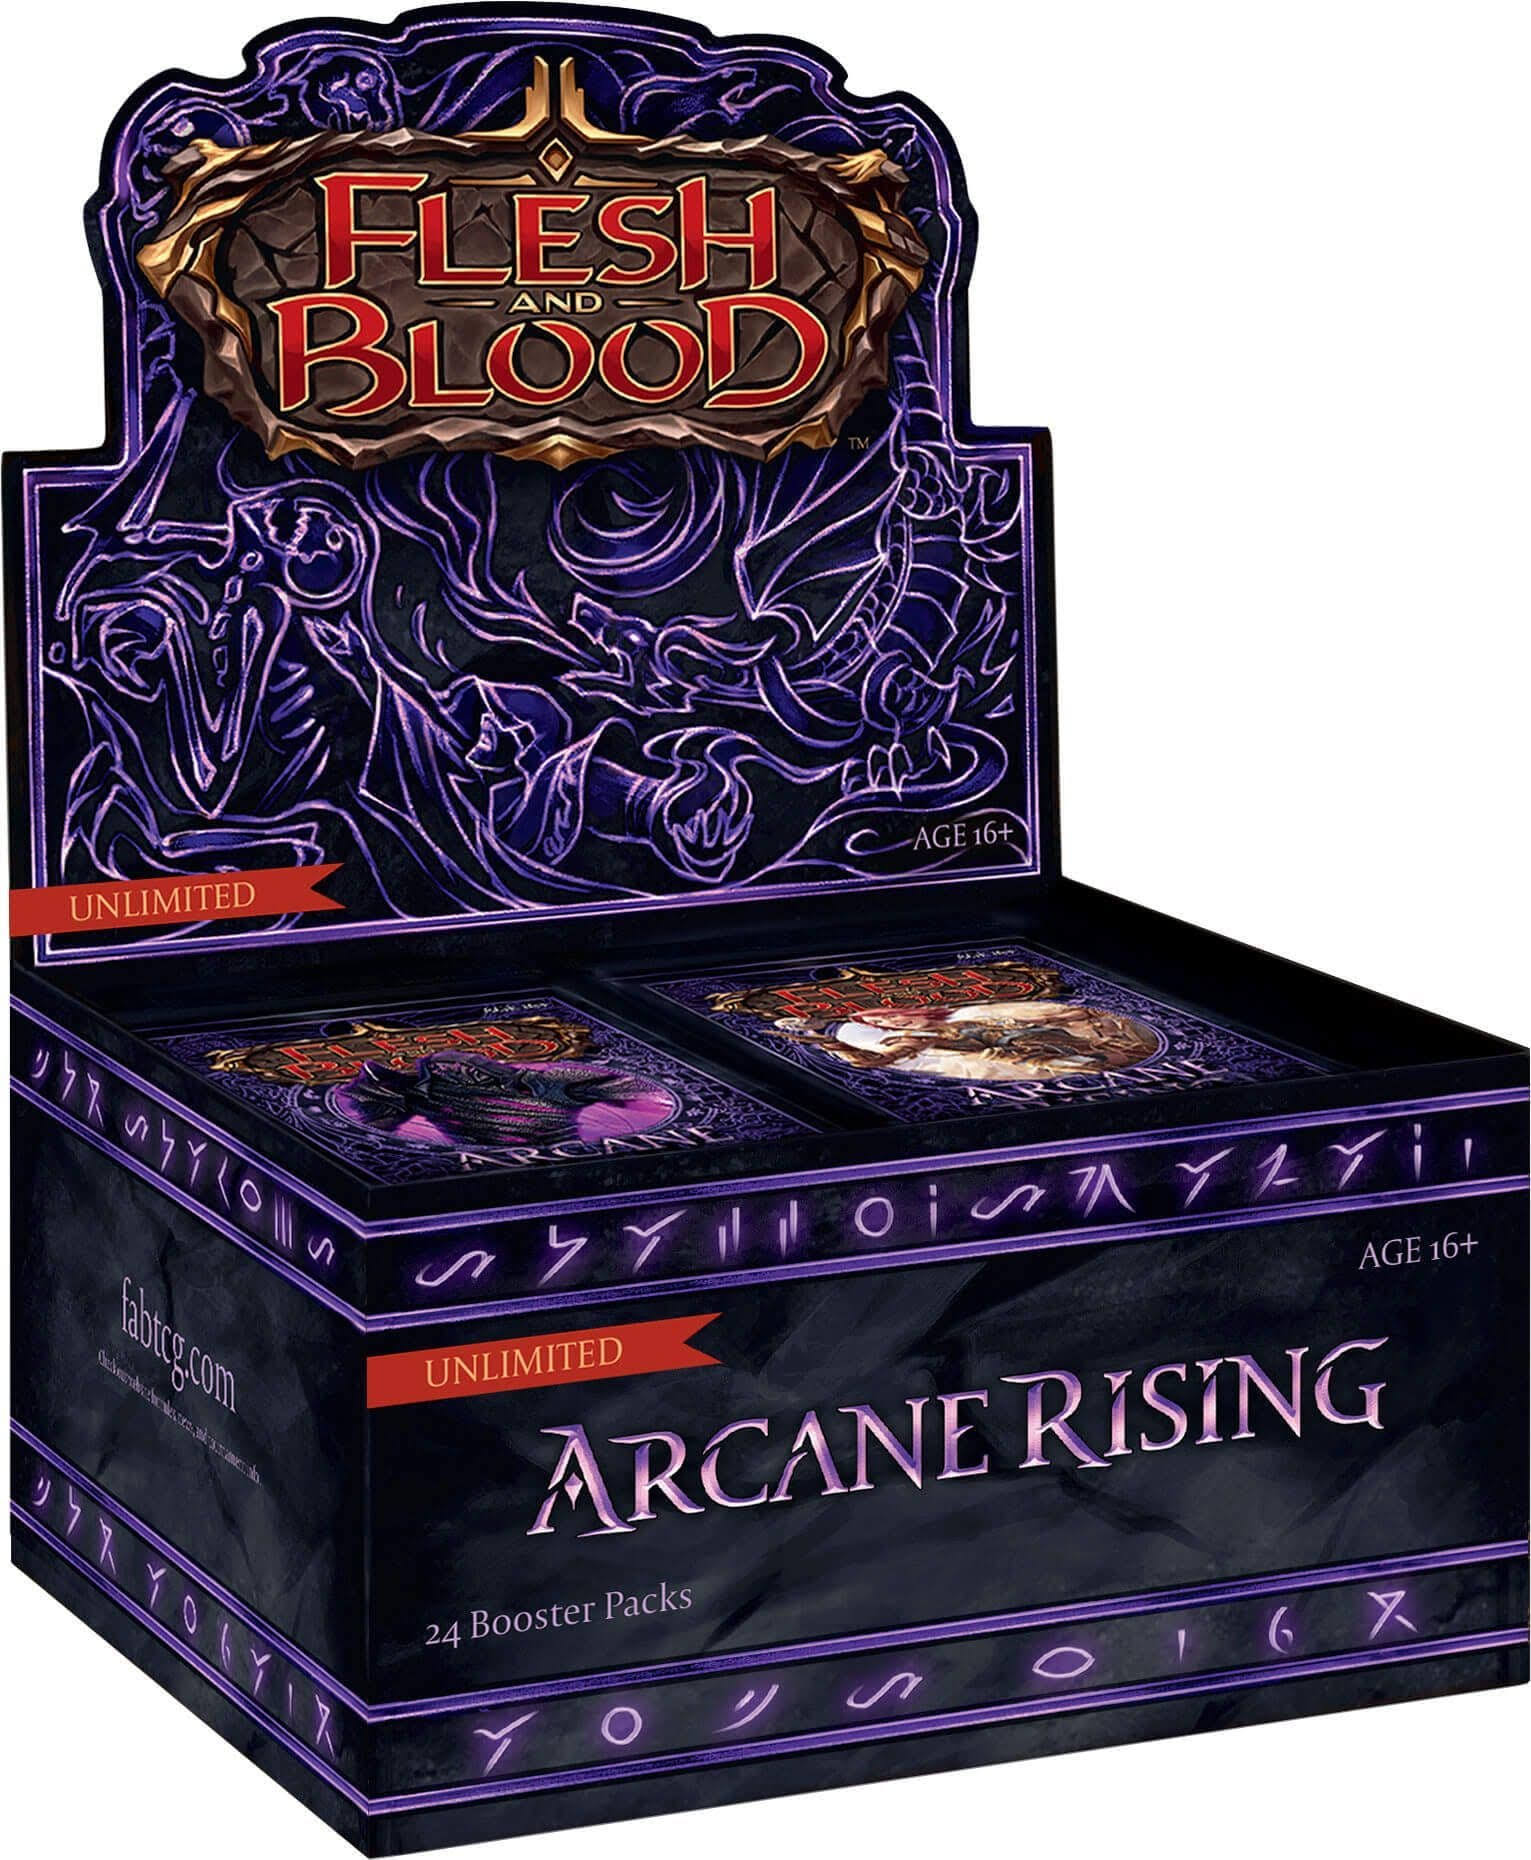 Flesh and Blood - Arcane Rising - Booster Pack - Unlimited